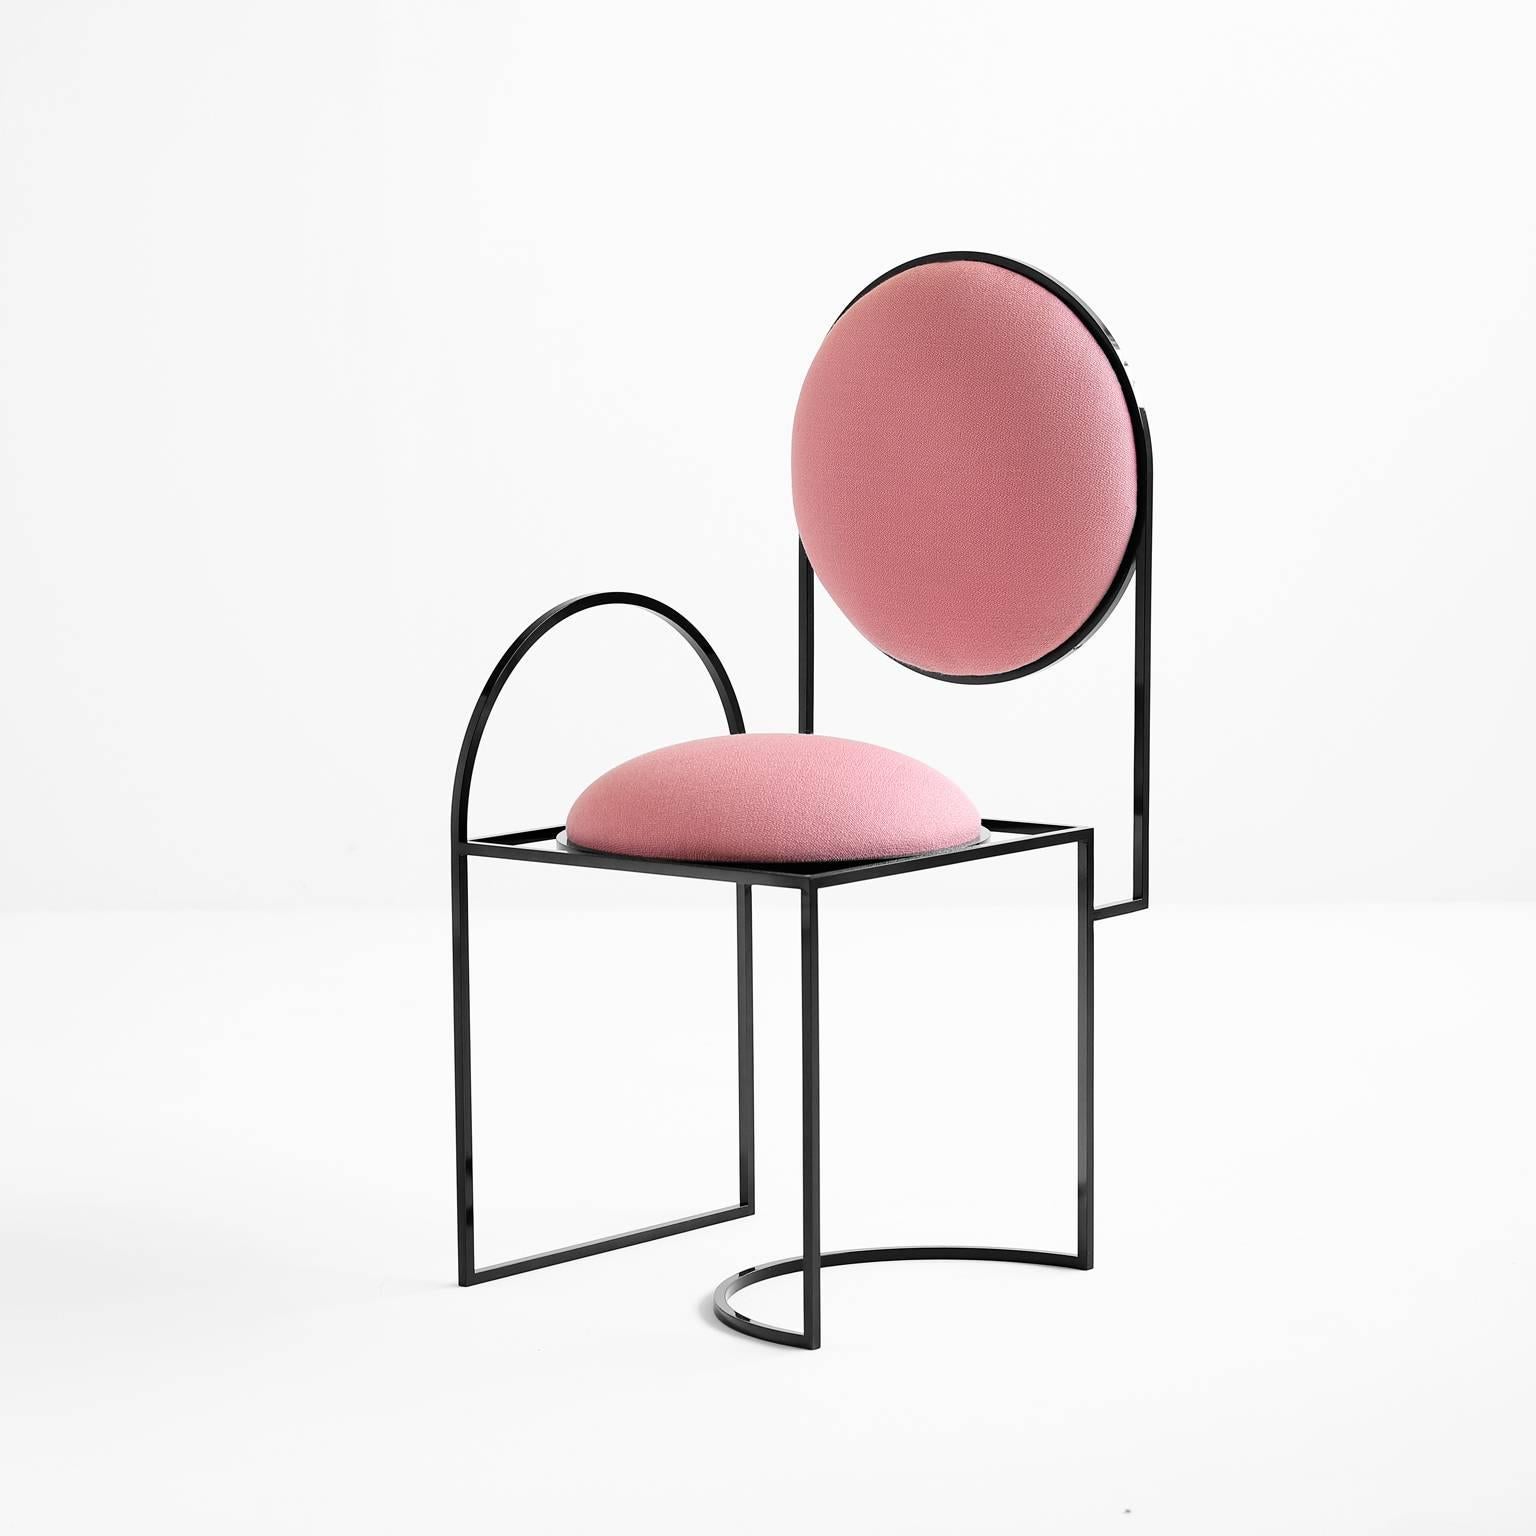 Italian Solar Chair in Pink Wool and Black Steel Frame, by Lara Bohinc For Sale